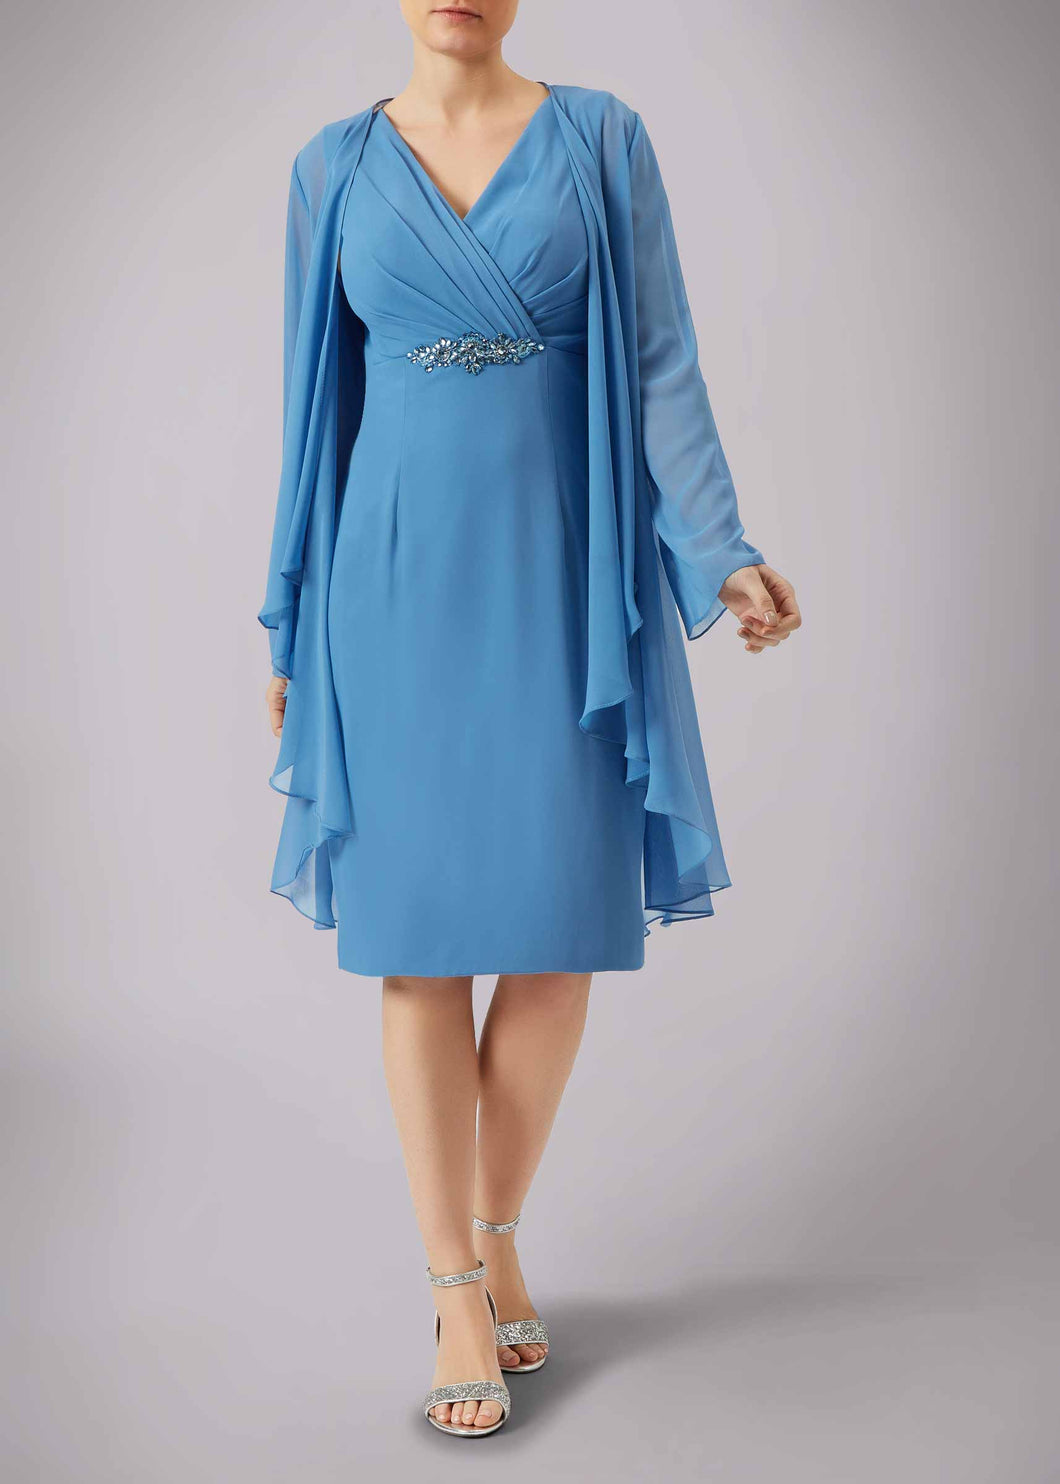 powder blue mother of the bride and groom chiffon dress